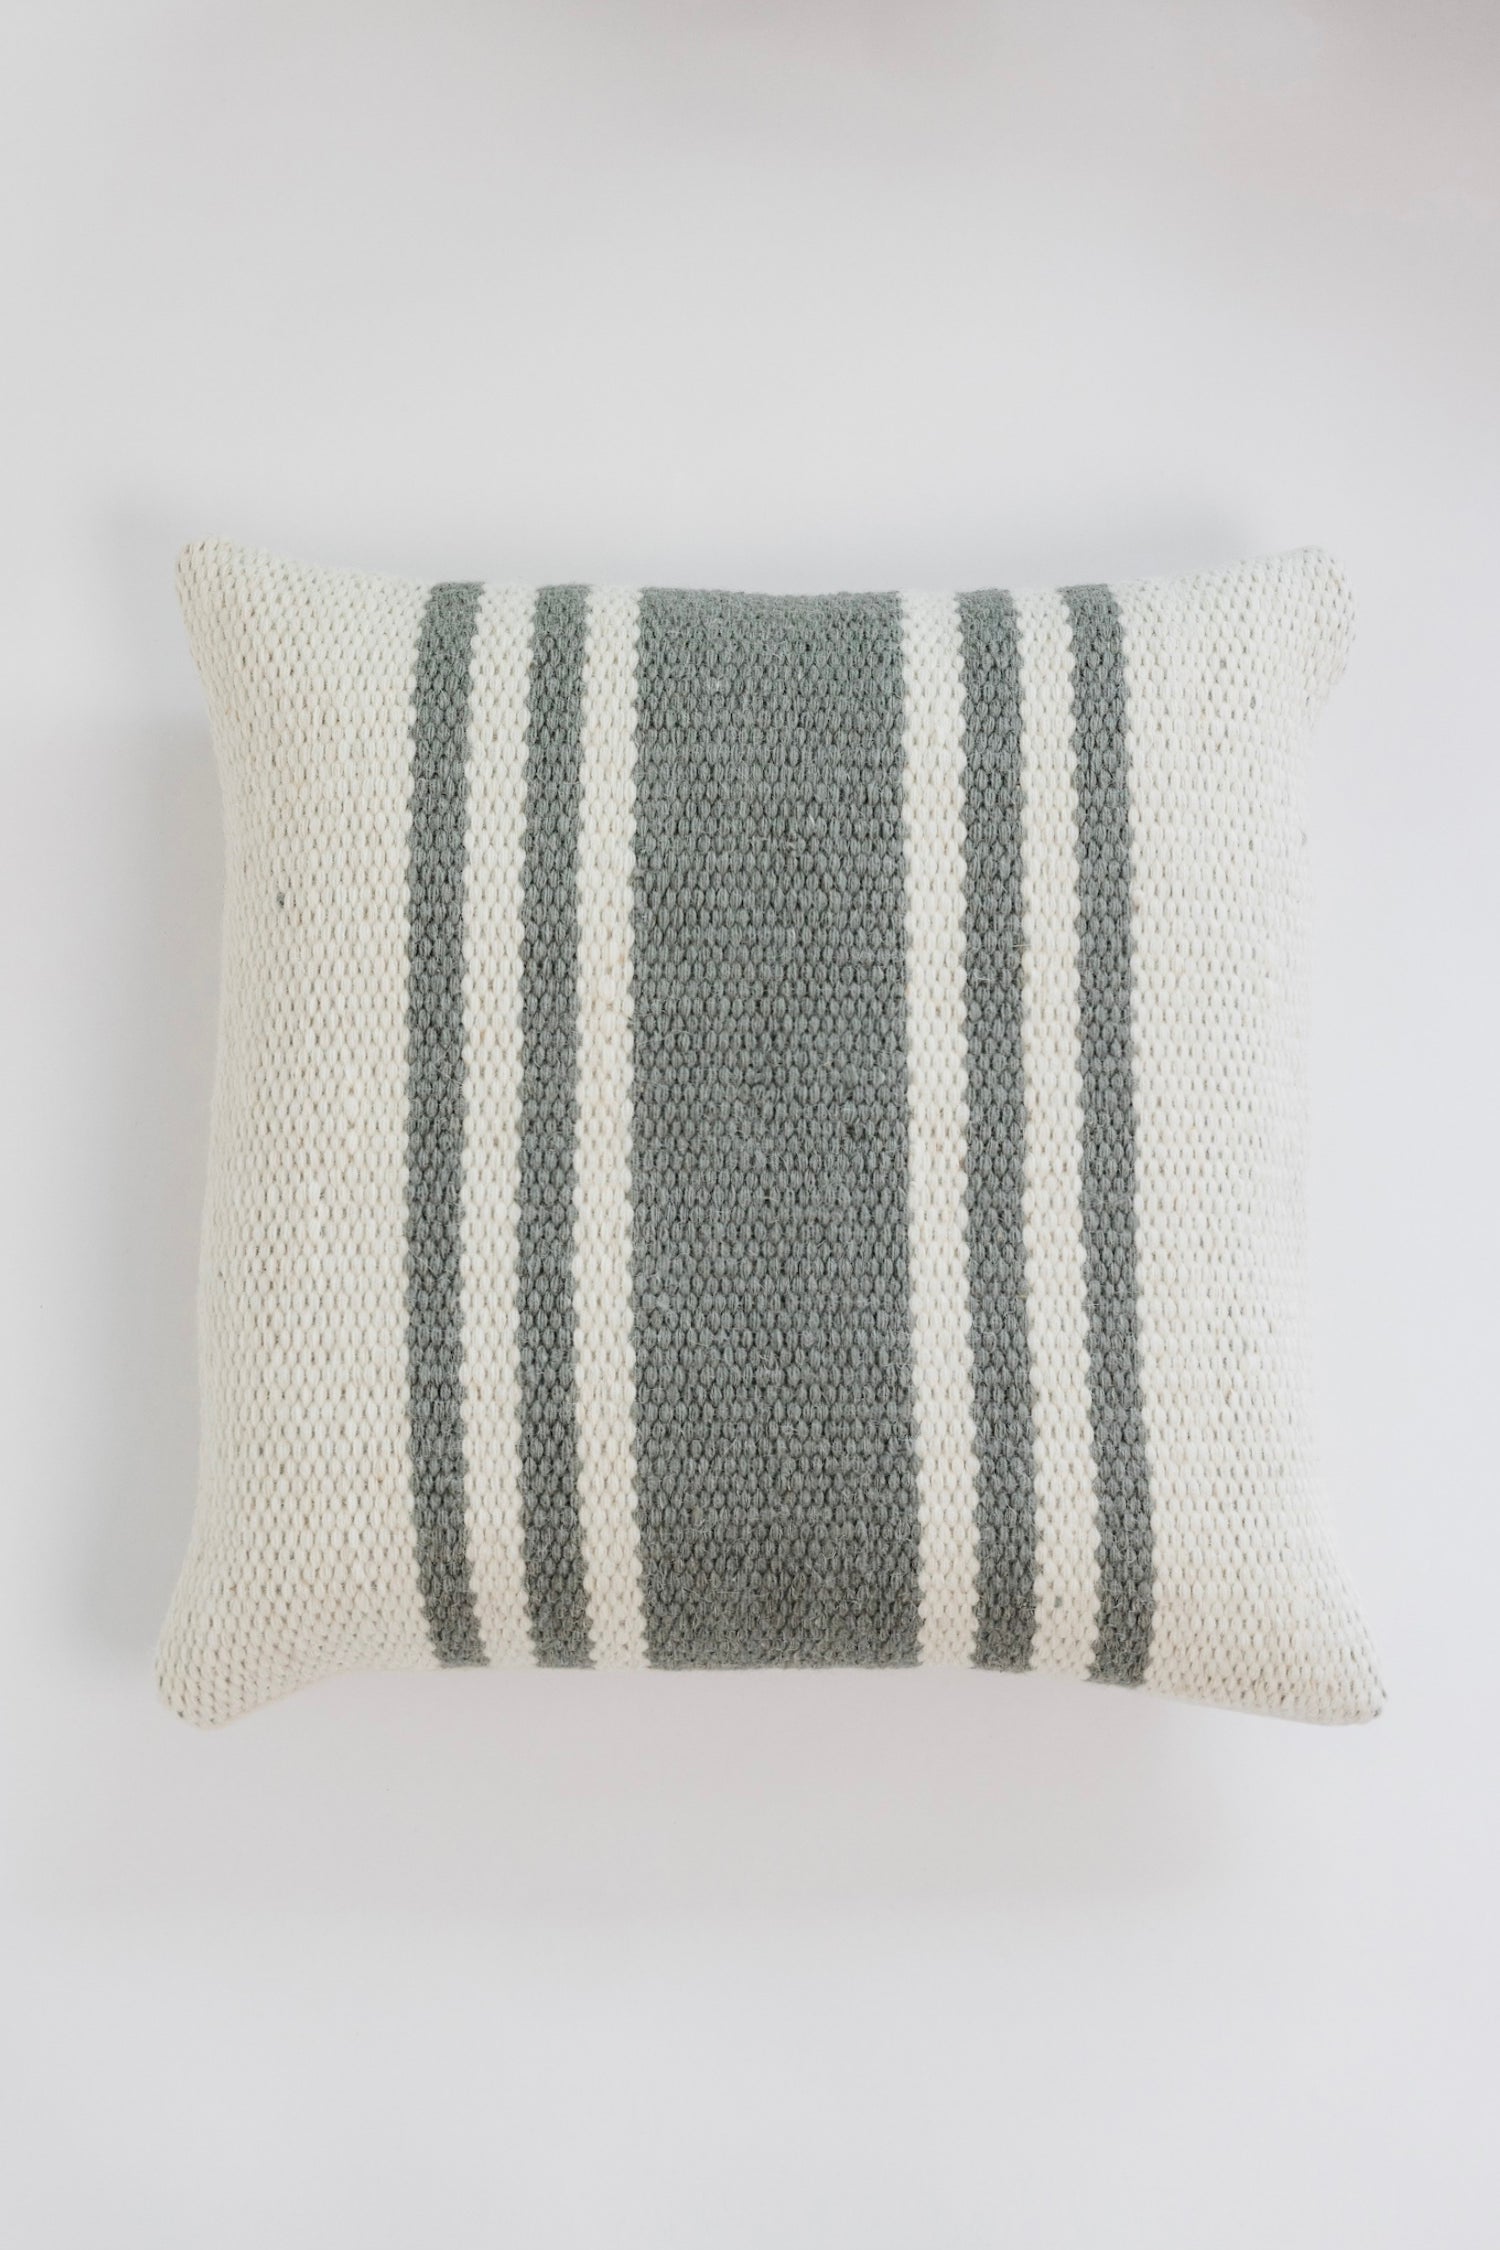 Tranquil Striped Pillow - Grey